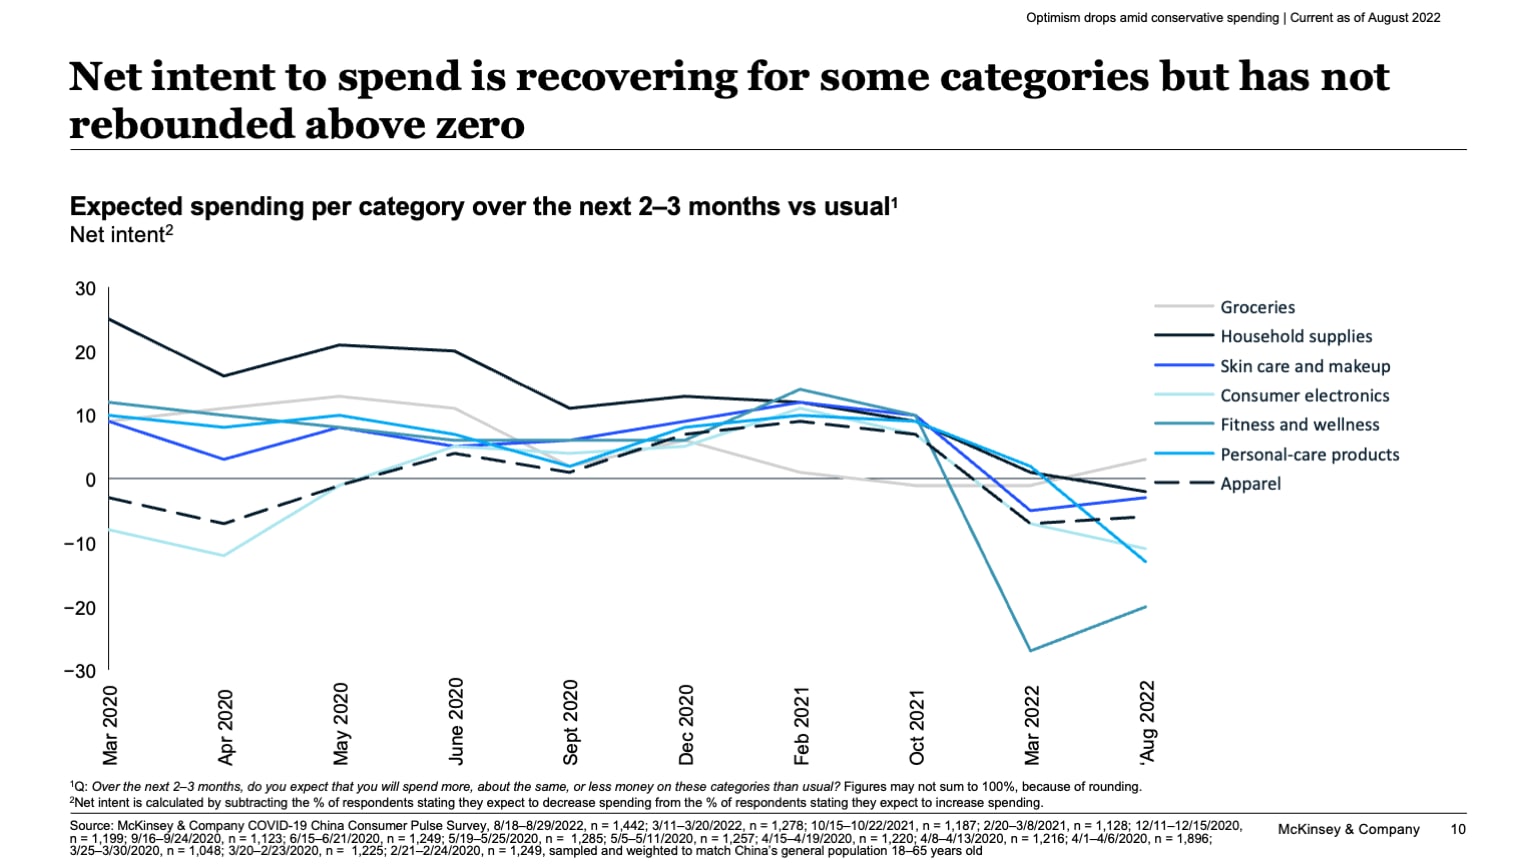 Net intent to spend is recovering for some categories but has not rebounded above zero